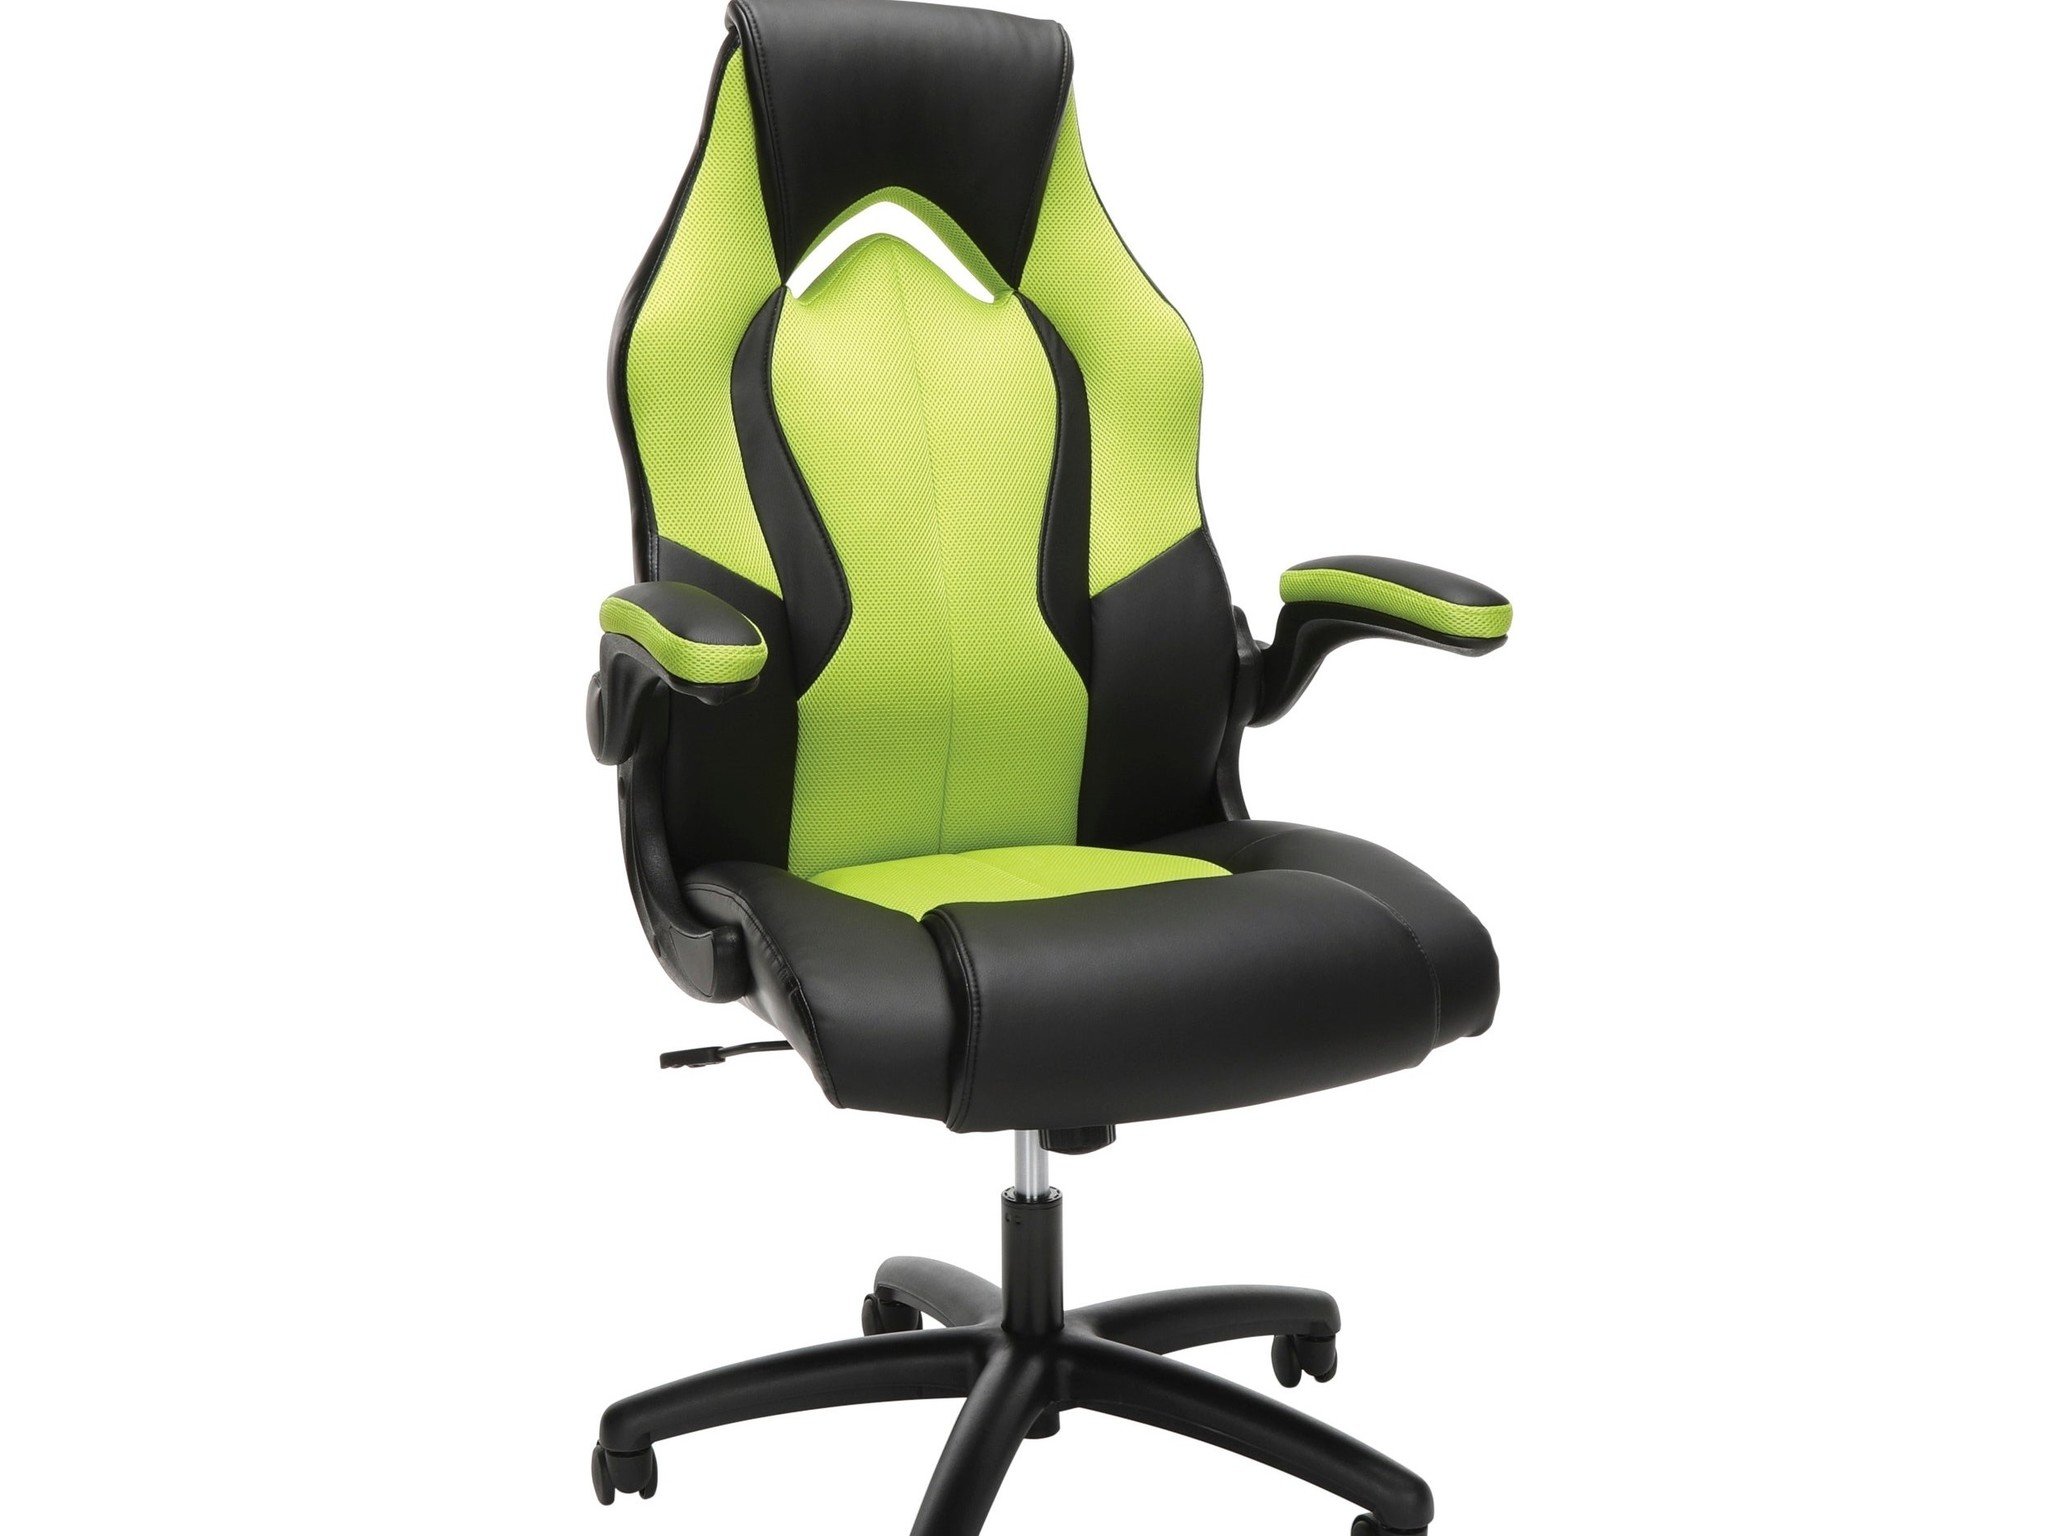 Best Cheap Gaming Chairs In 2019 5 Great Chairs That Will Fit Any